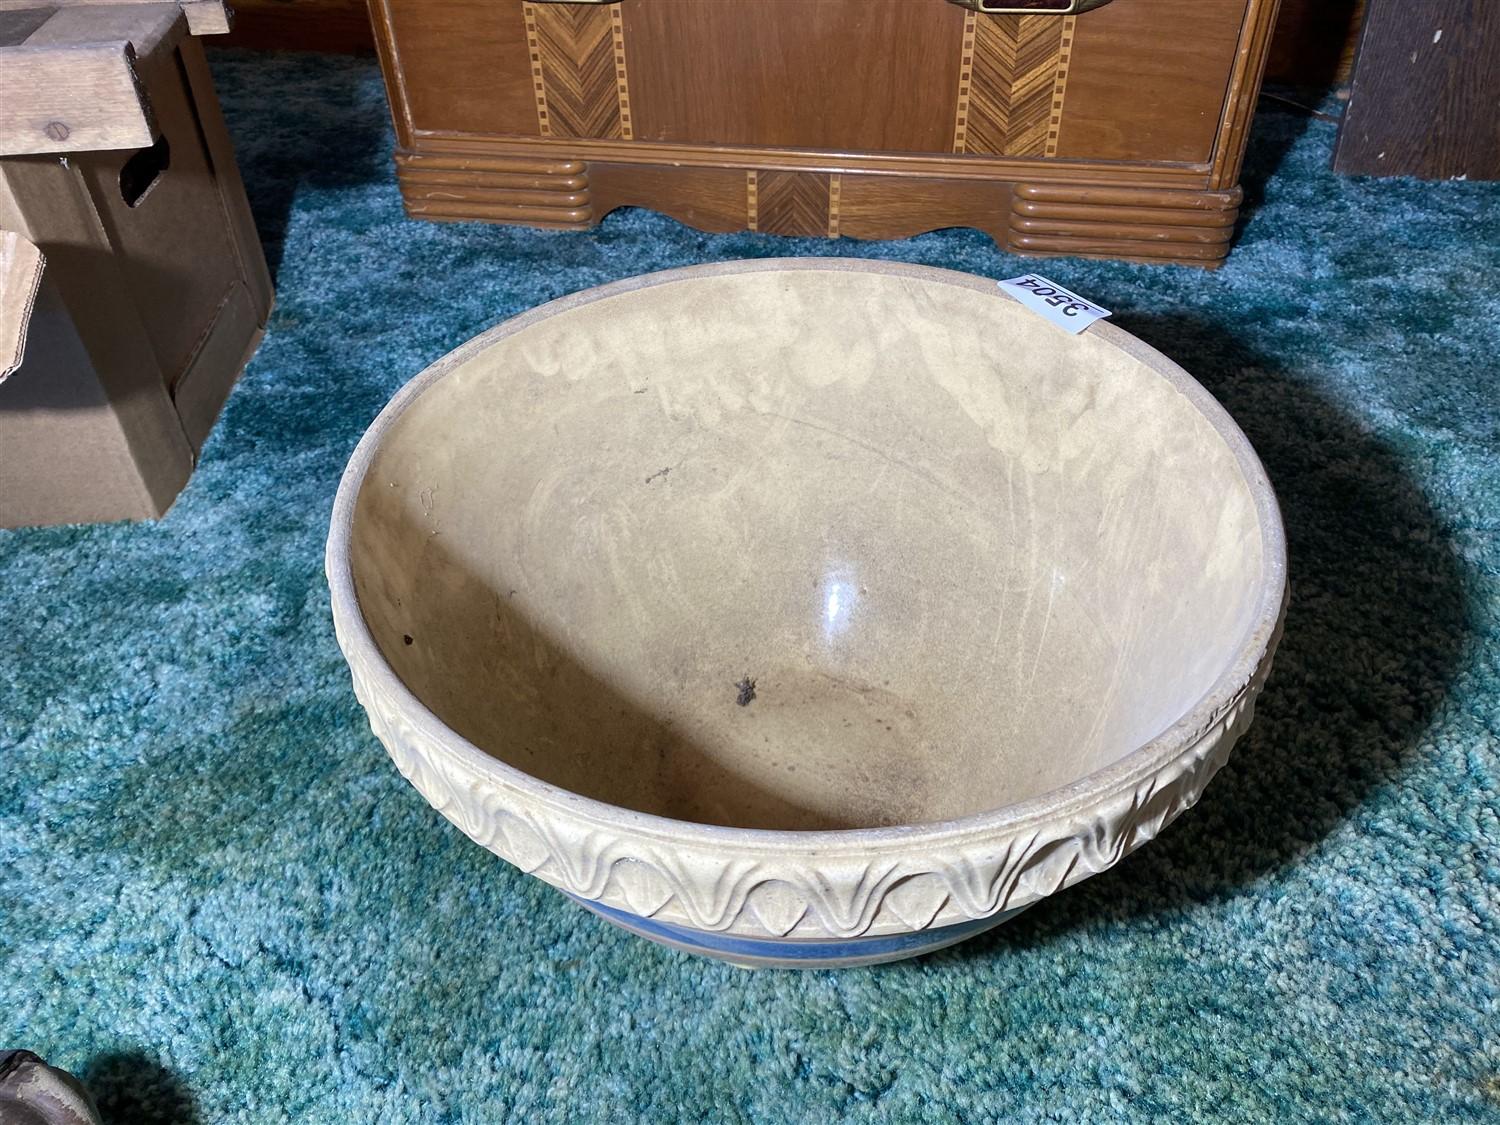 Unusually large mixing bowl - 14.5" across